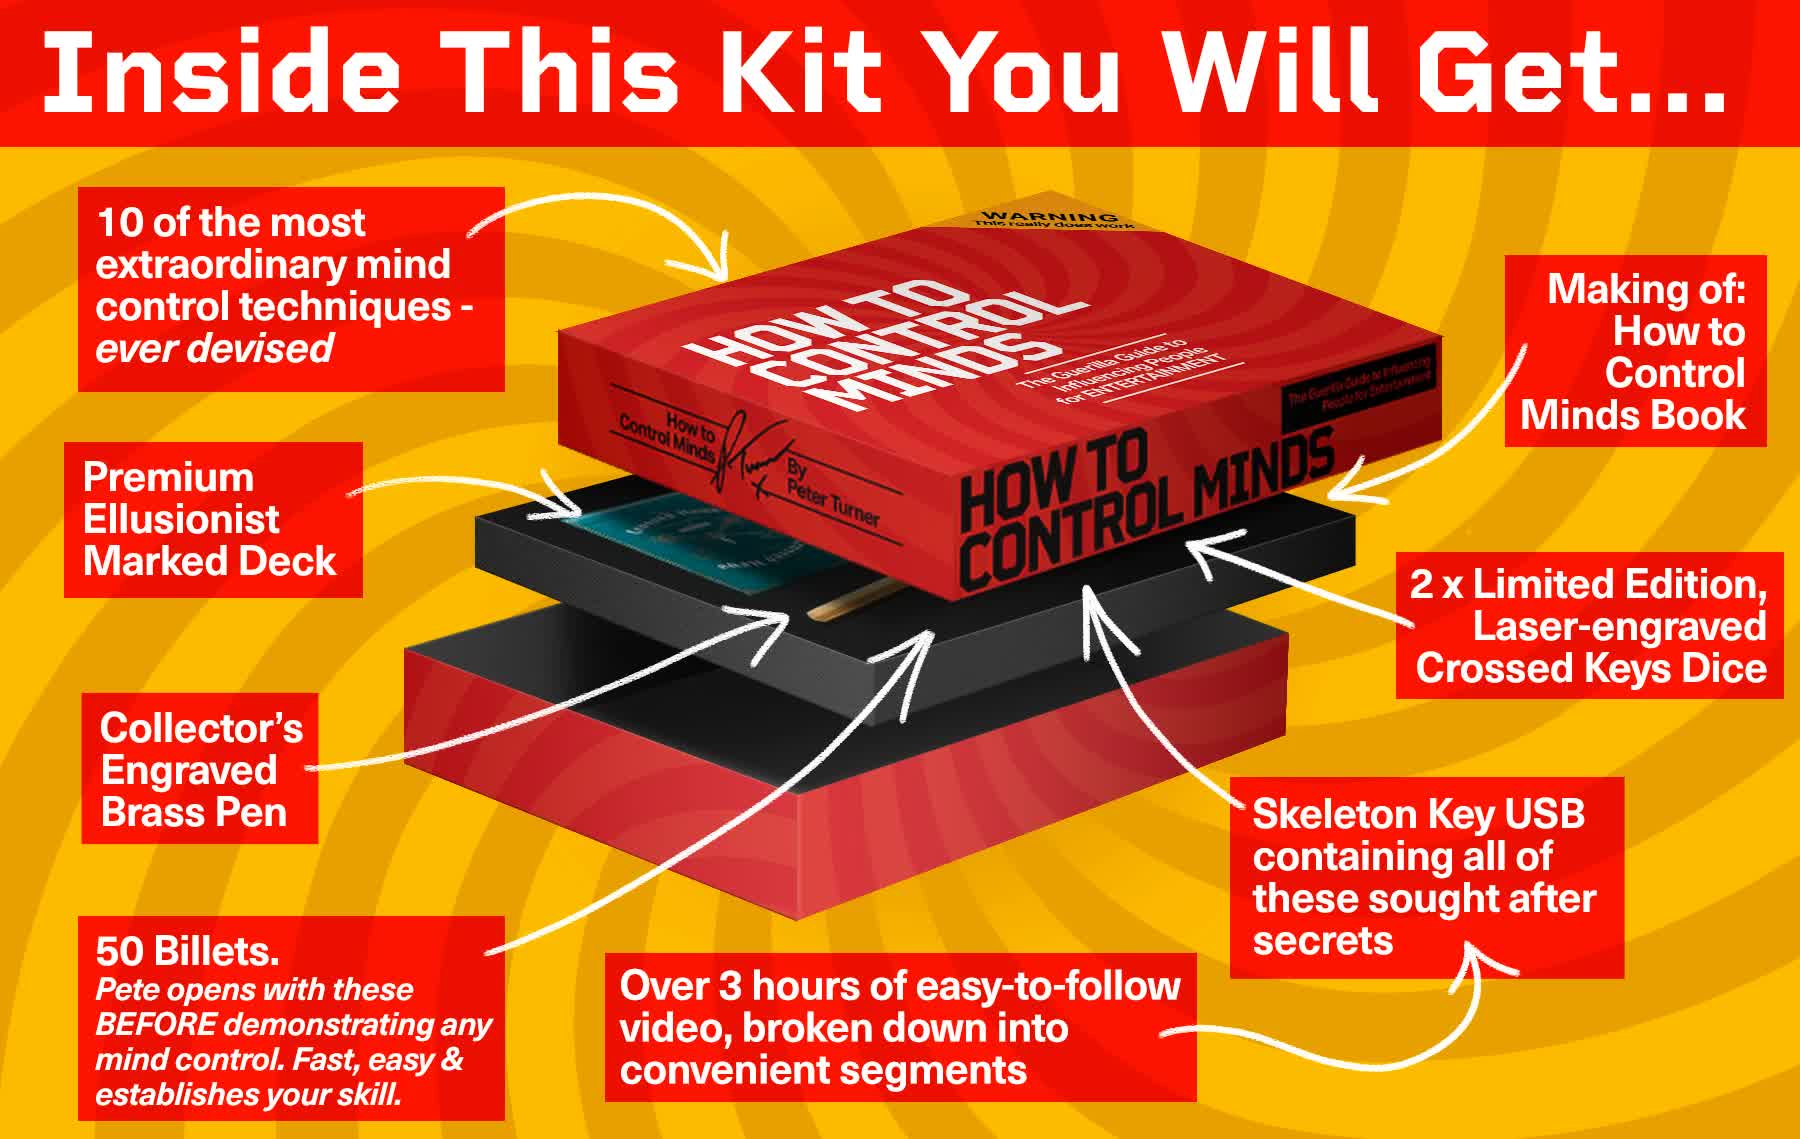 How to Control Minds Kit 2.0